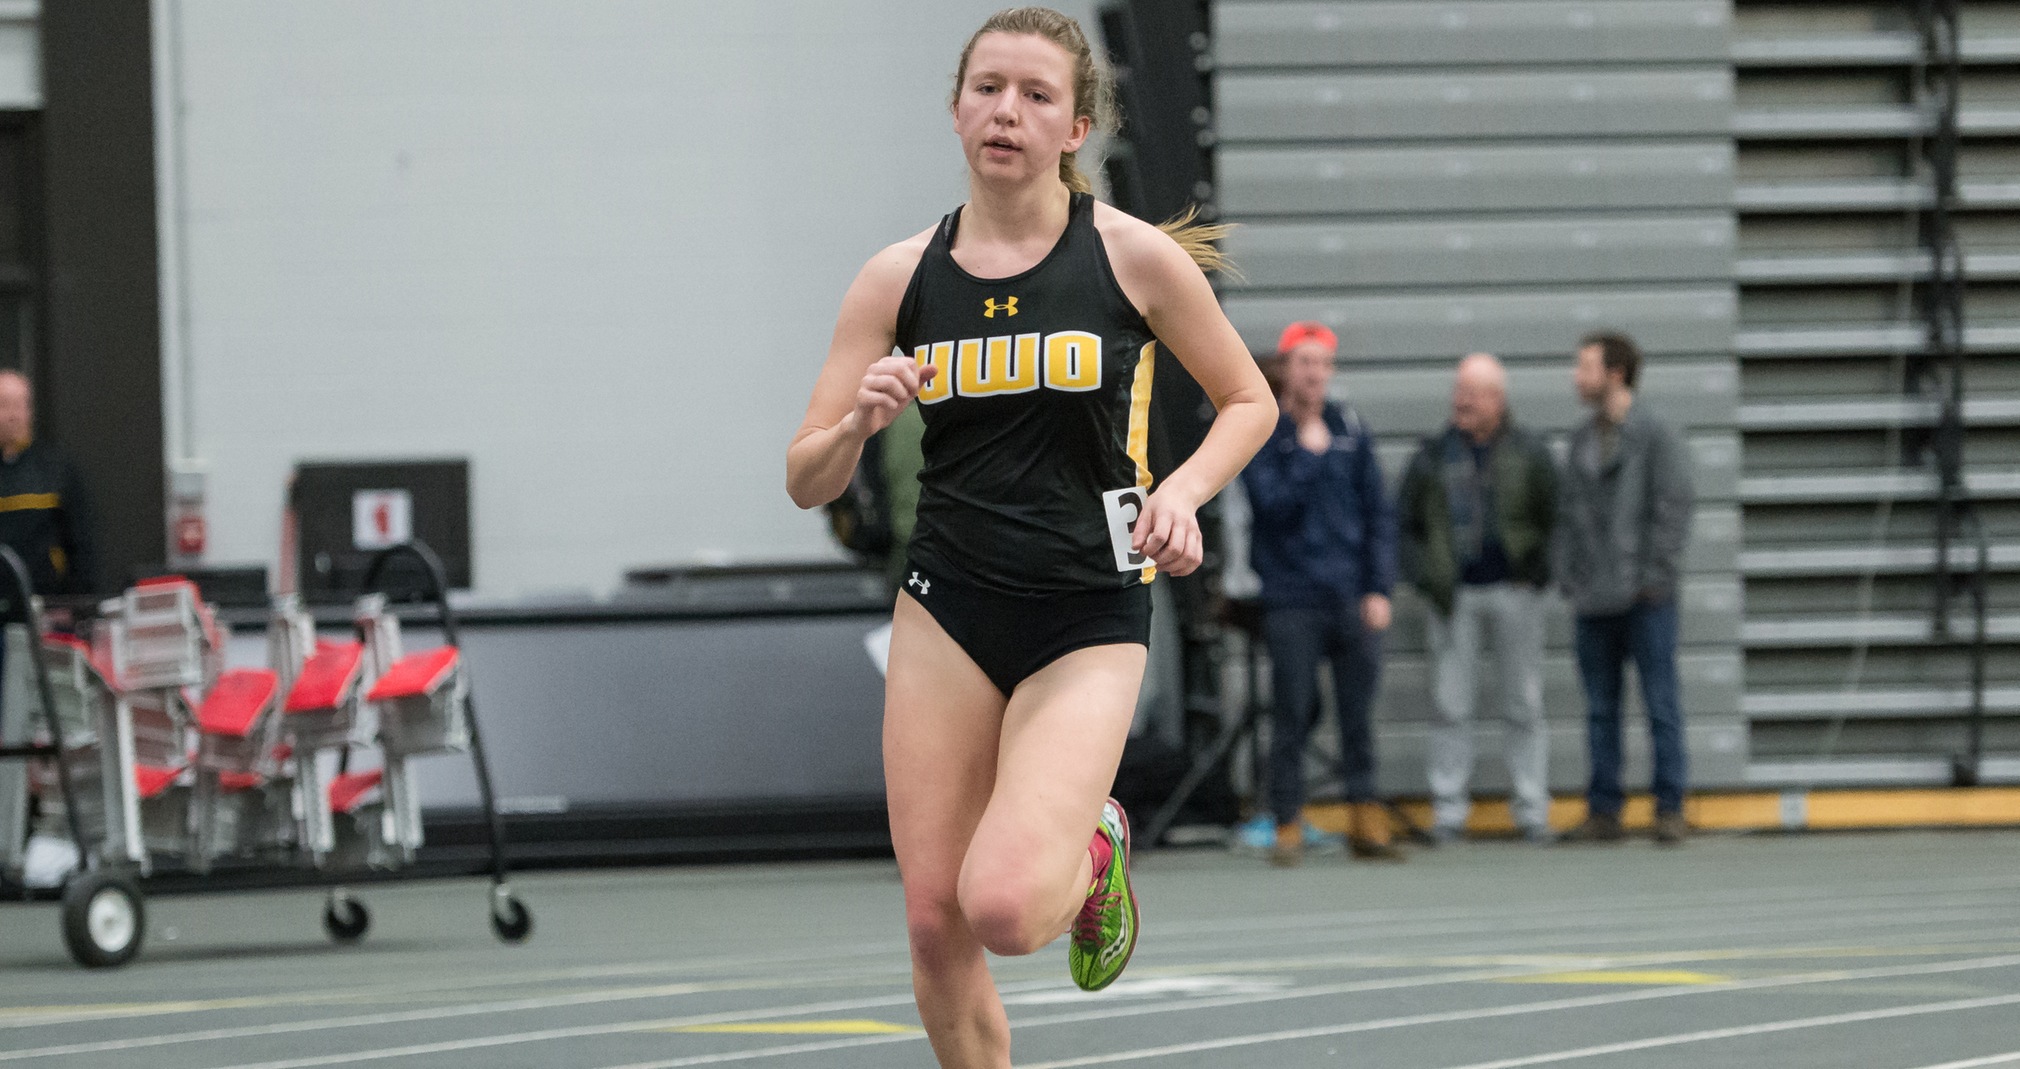 Ashton Keene finished second in the mile run at the Tadd Metzger Invitational.